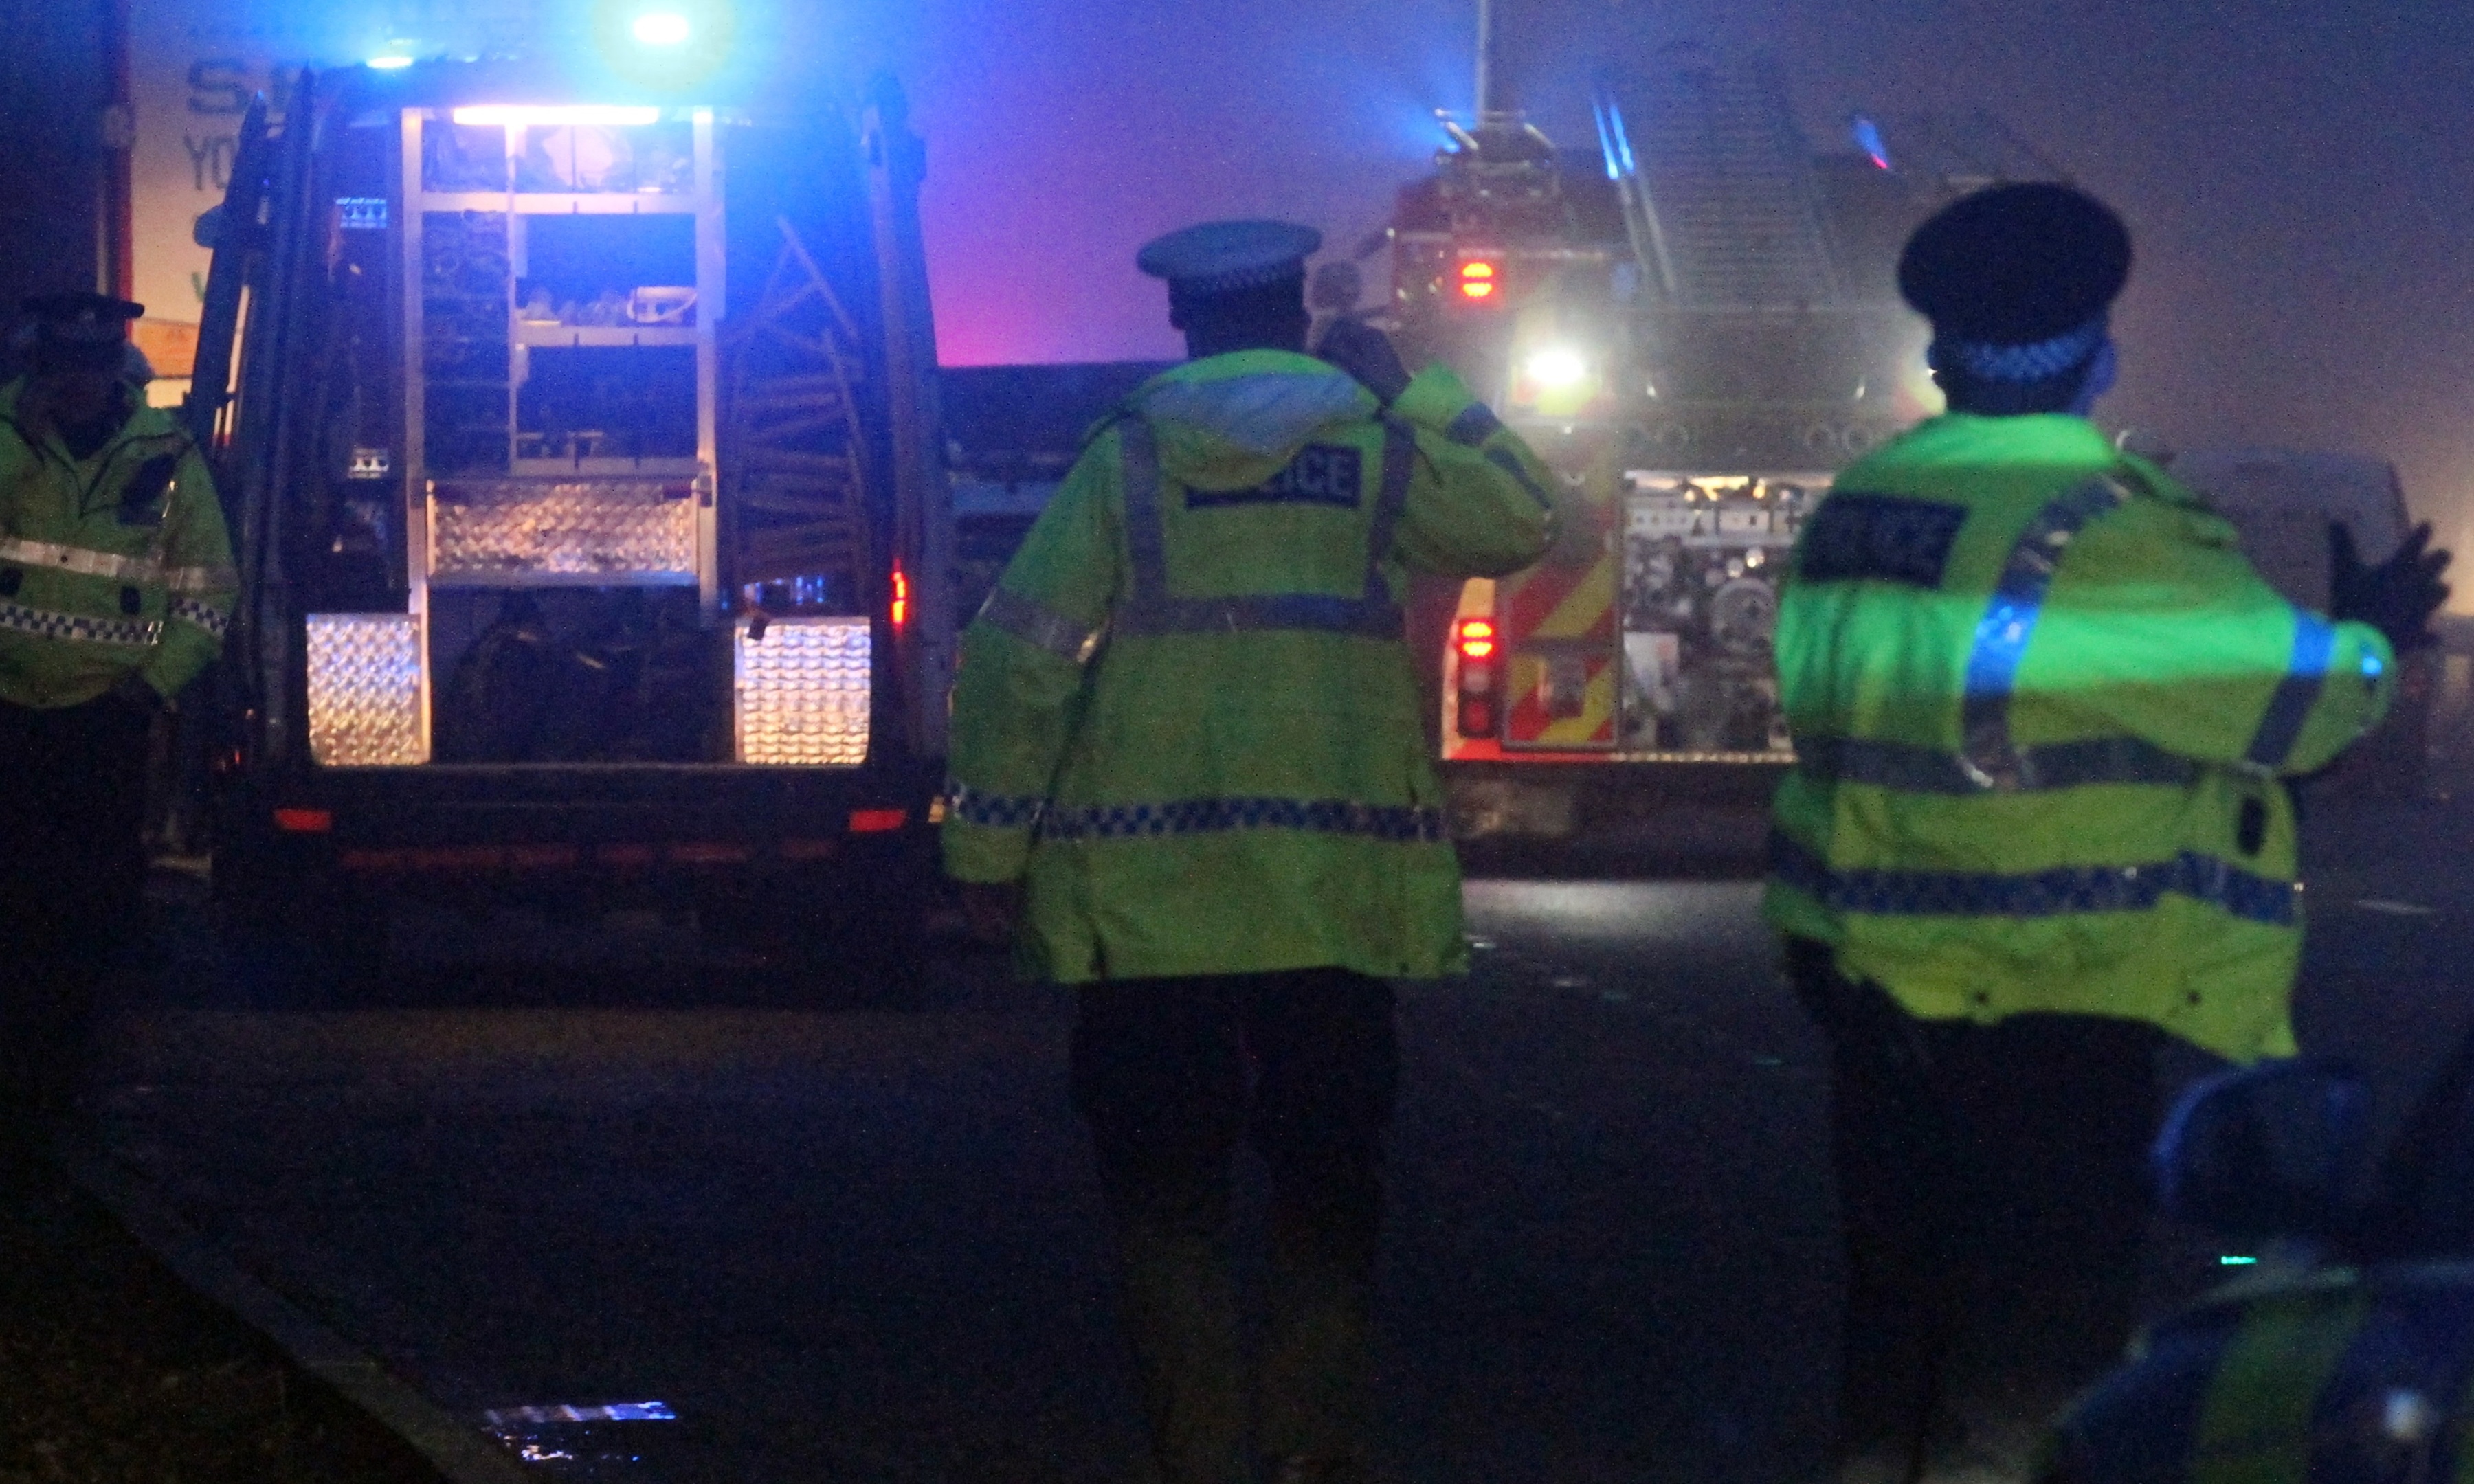 The emergency services at the scene.